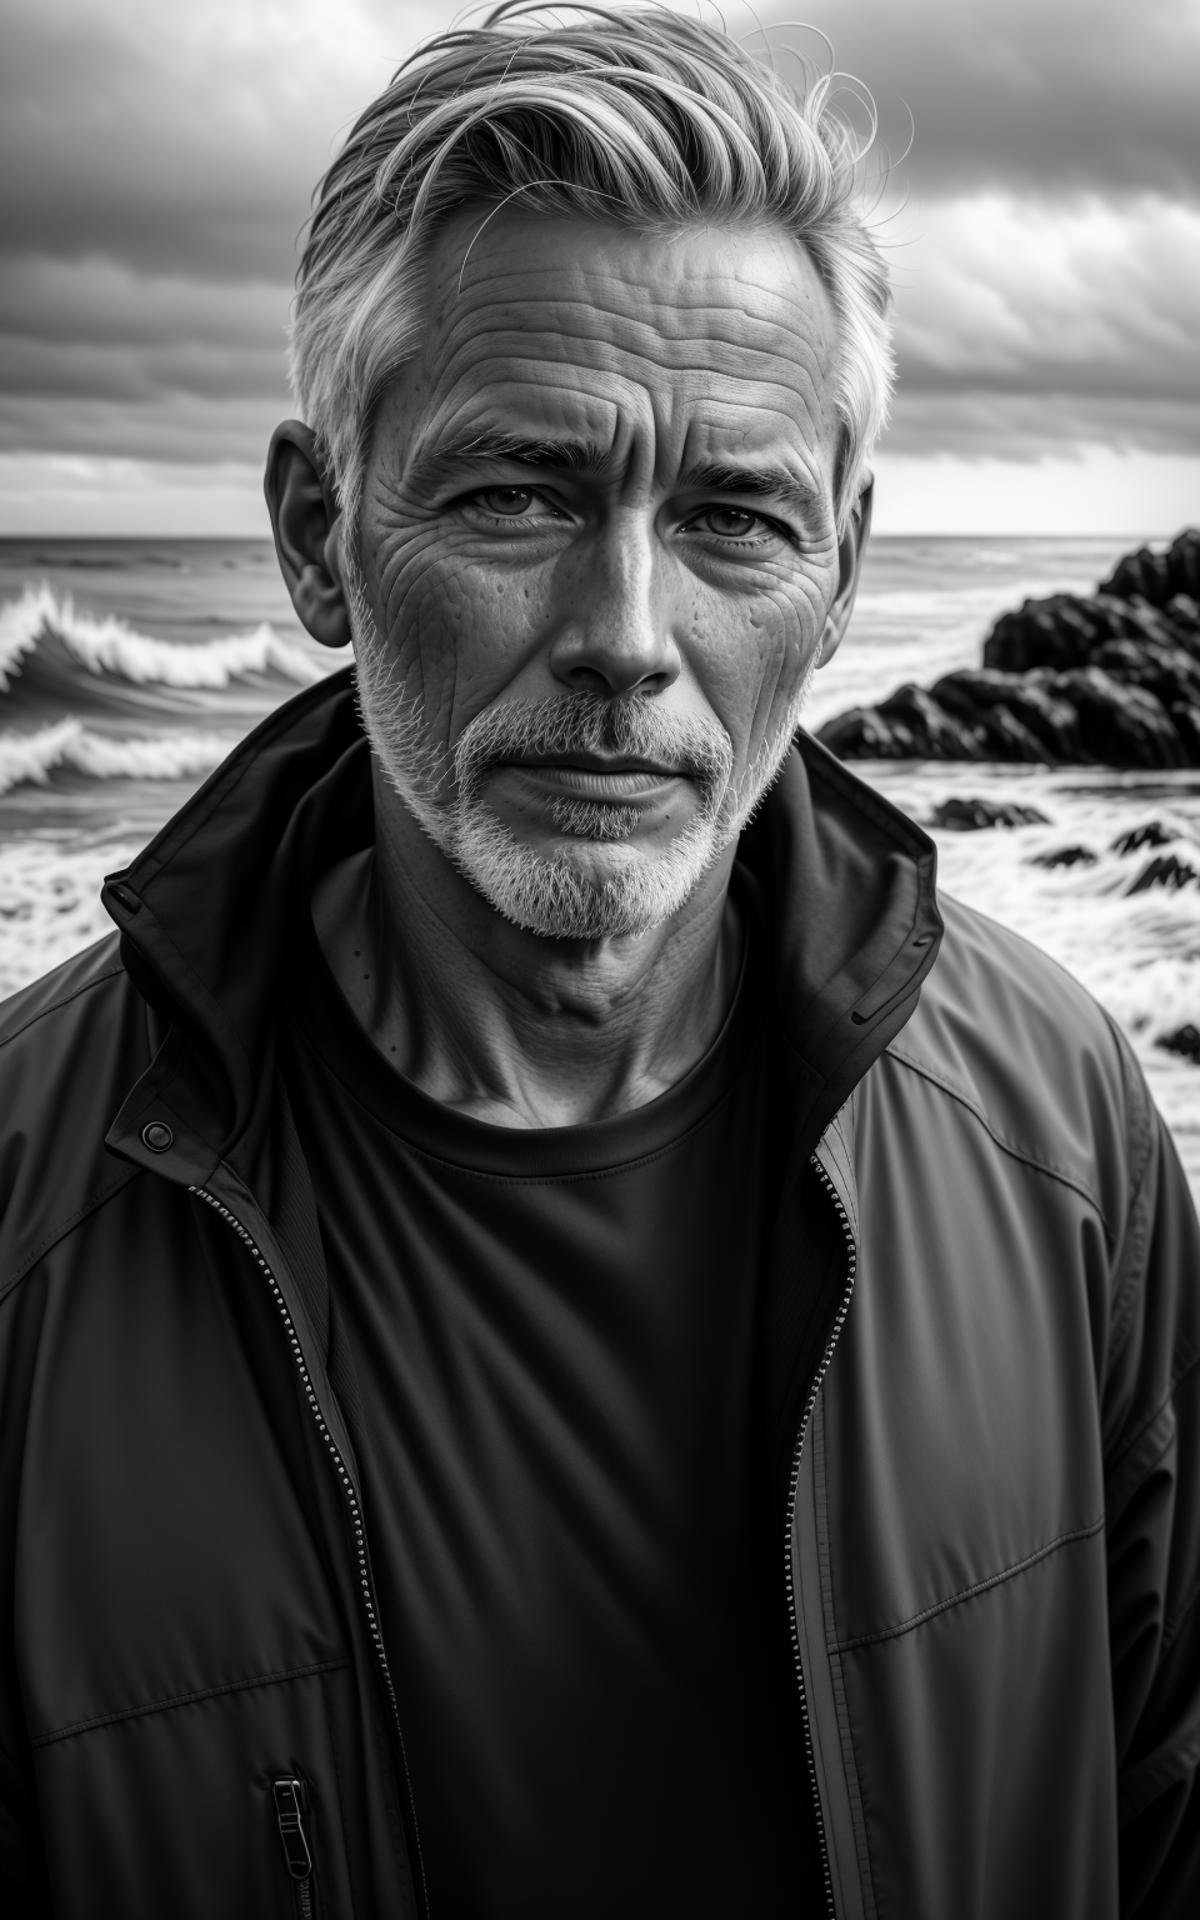 Man wearing a black shirt and jacket standing by the ocean.